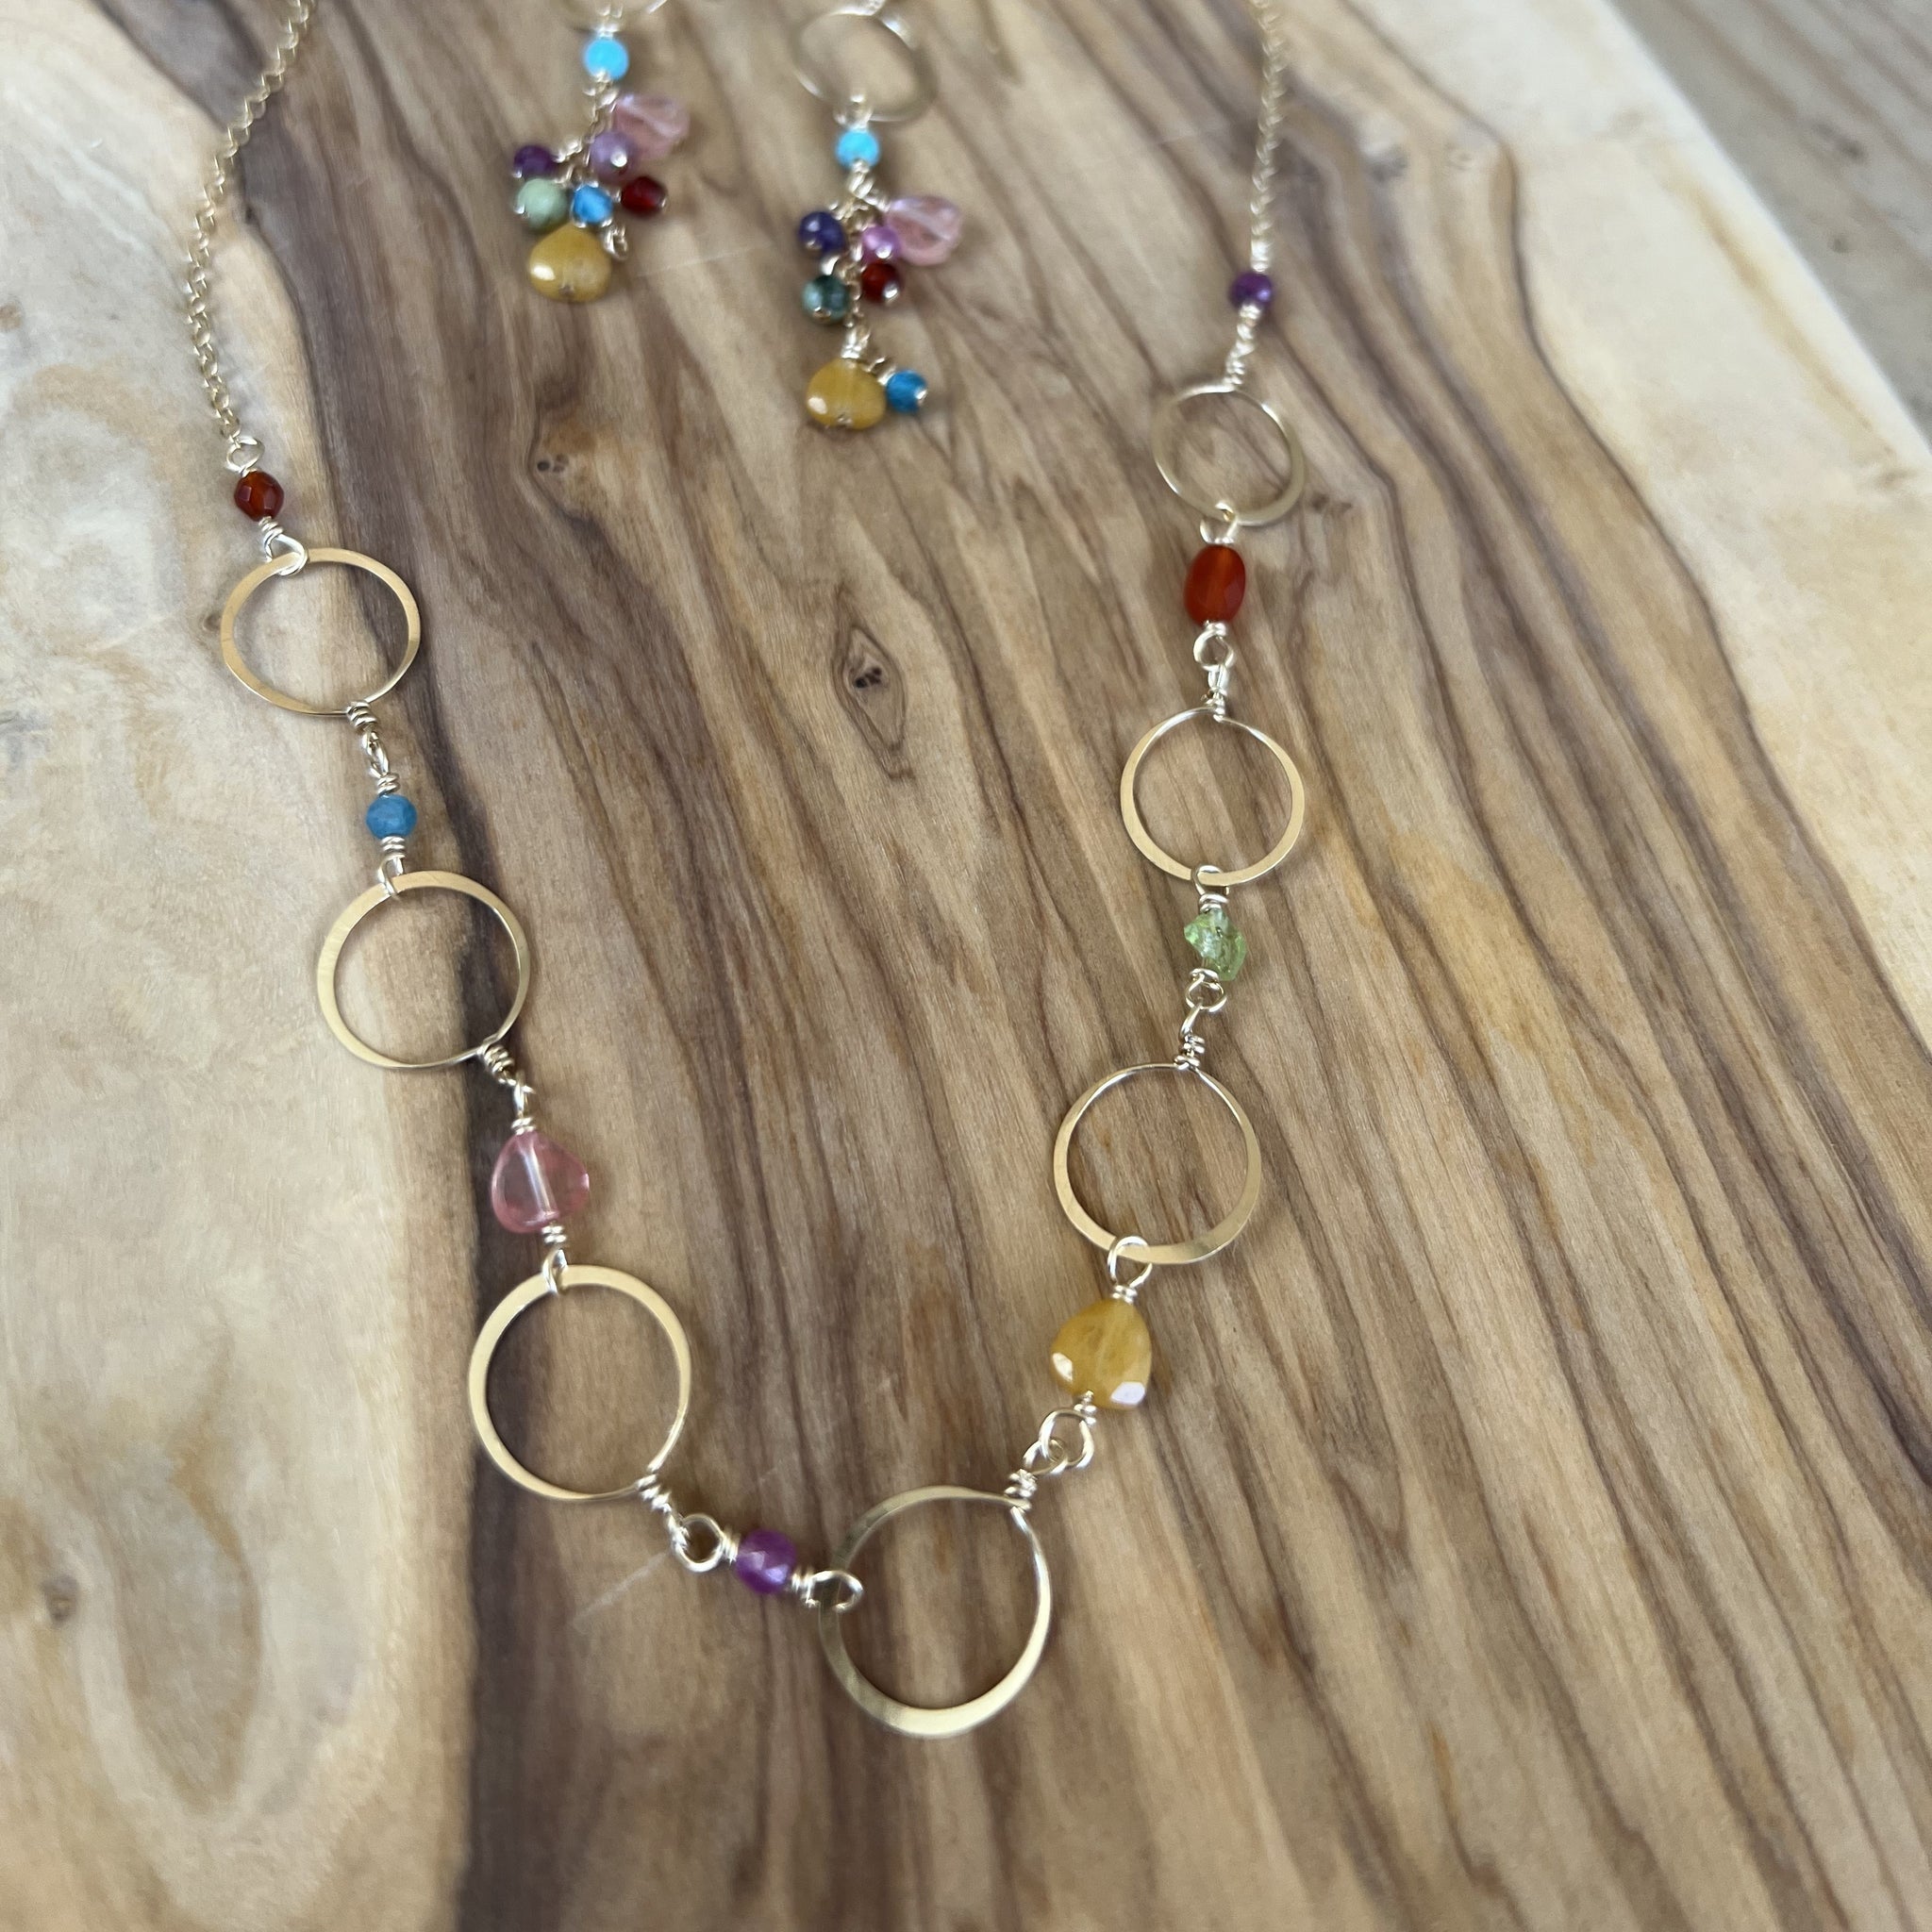 Circles Necklace with Multi-Colored Stones